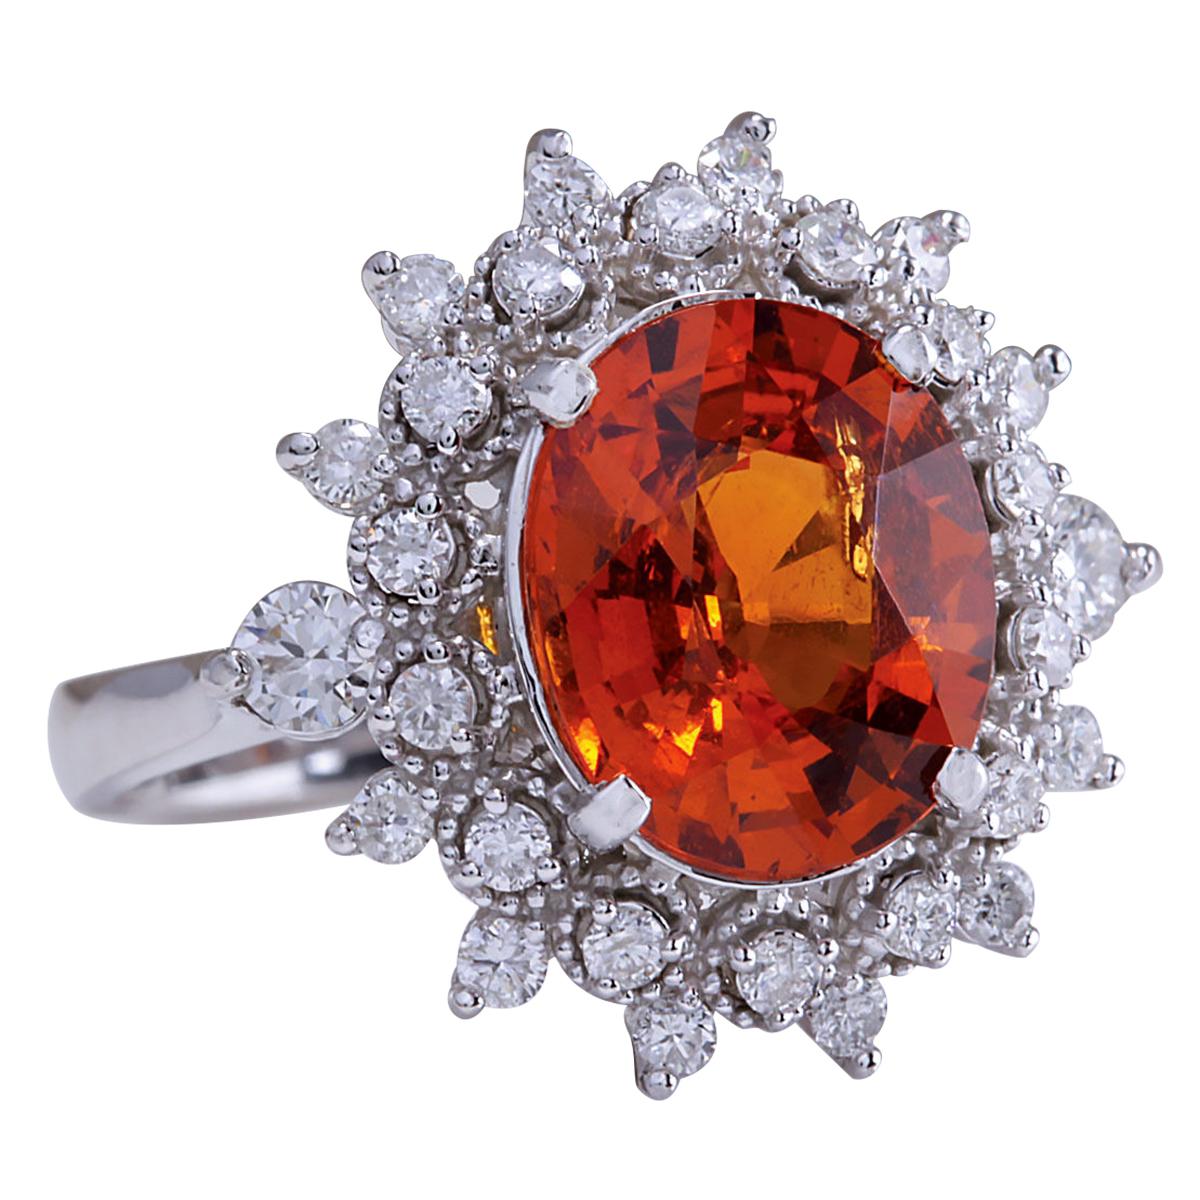 Stamped: 18K White Gold<br>Total Ring Weight: 5.5 Grams<br>Ring Length: N/A<br>Ring Width: N/A<br>Gemstone Weight: Total Natural Mandarin Garnet Weight is 5.15 Carat (Measures: 11.46x9.79 mm)<br>Color: Orange<br>Diamond Weight: Total Natural Diamond